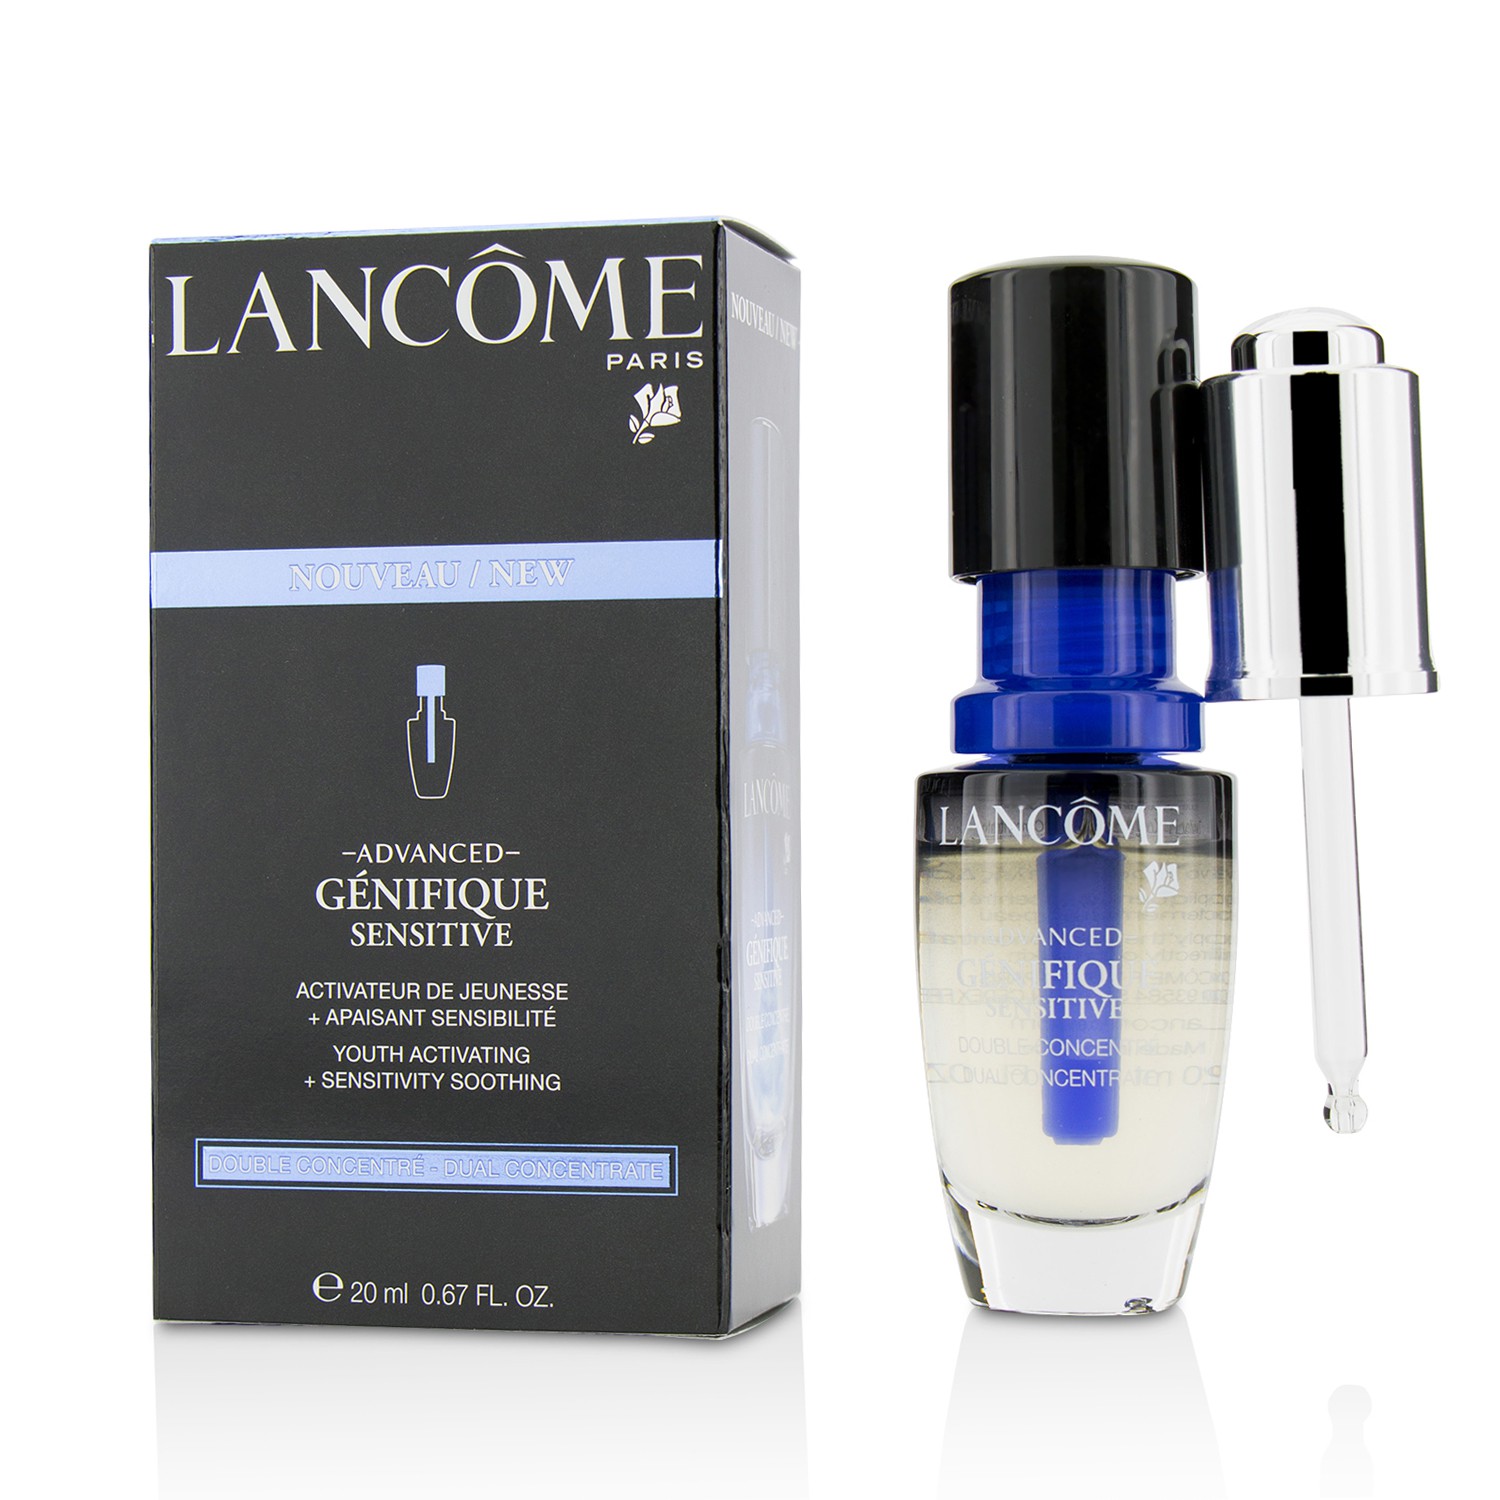 Advanced Genifique Sensitive Youth Activating + Sensitivity Soothing Dual Concentrate - All Skin Types Even Sensitive Lancome Image